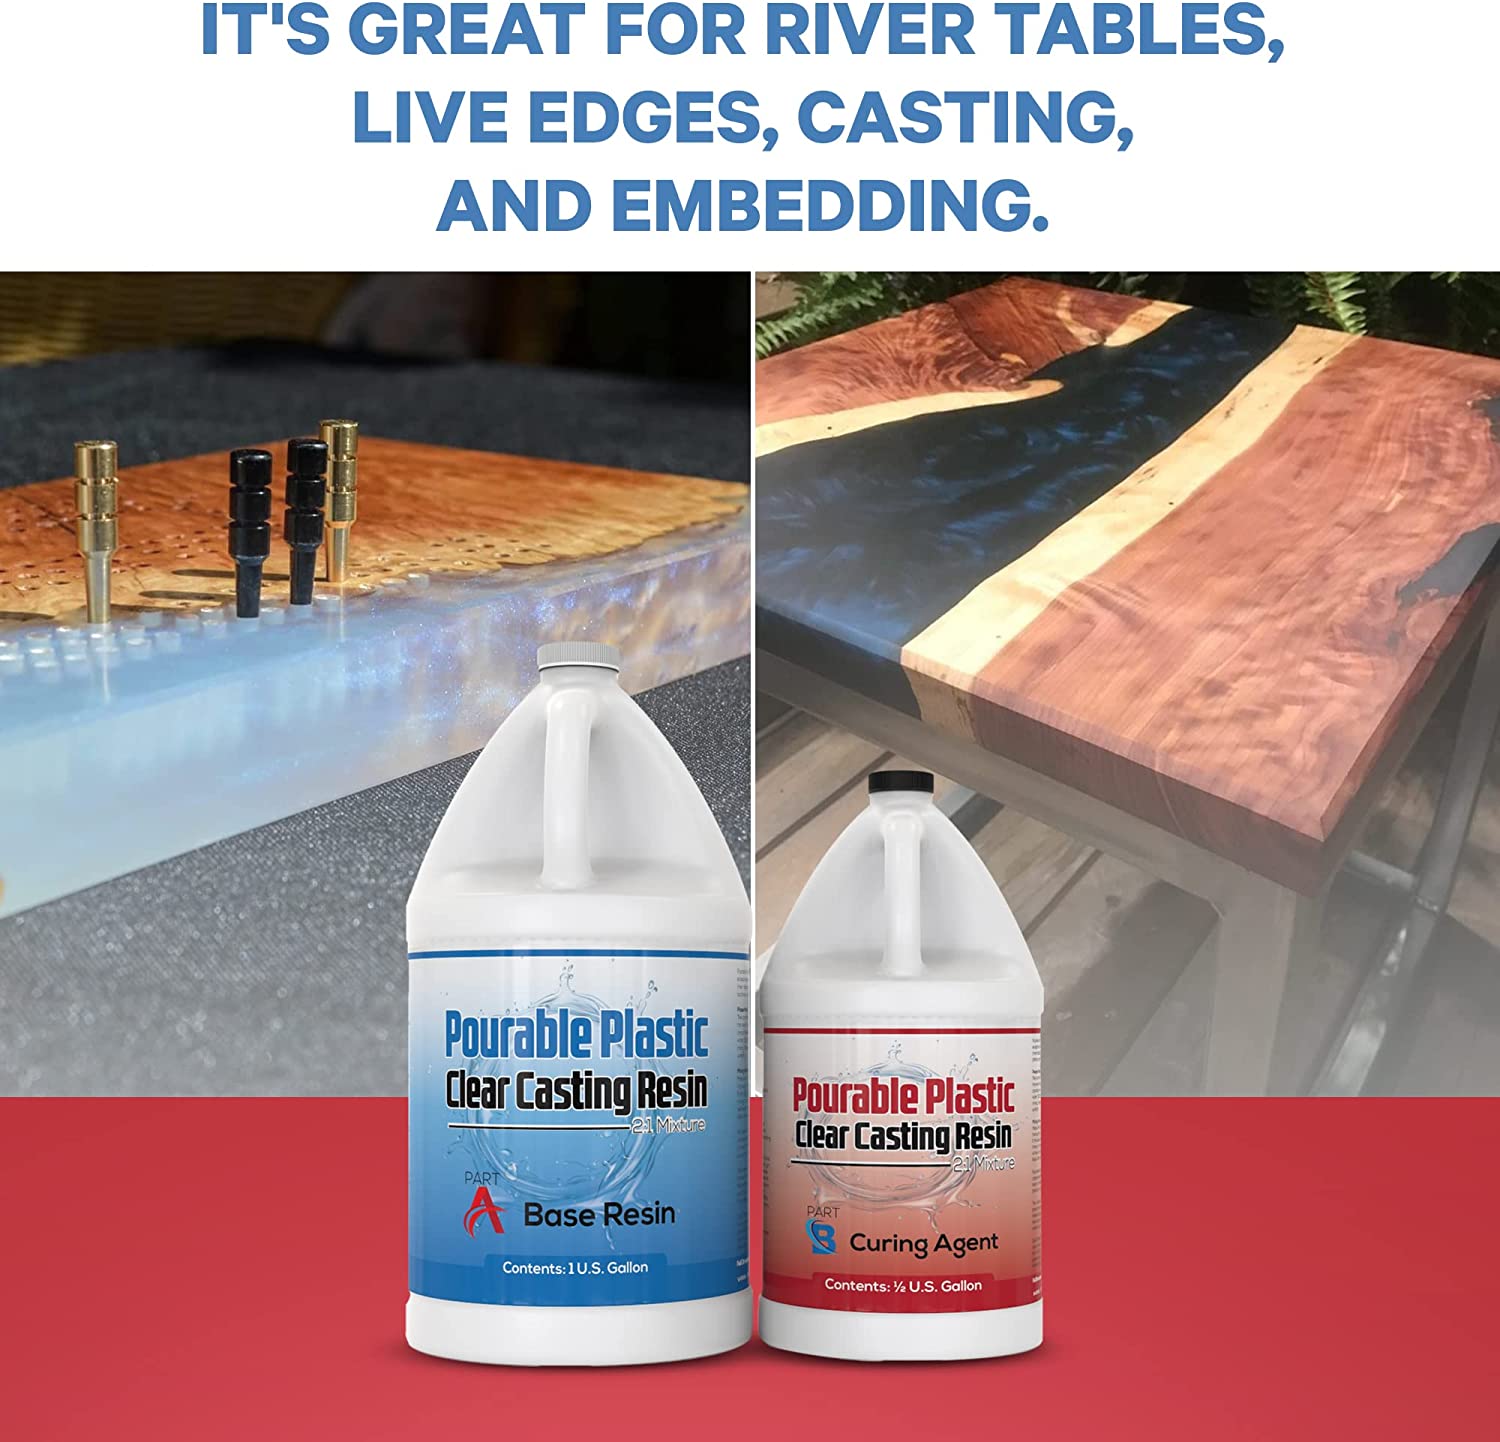 Promise Epoxy - 1.5 Gallon Kit of Deep Pour, Pourable Plastic Up to 2  Thick